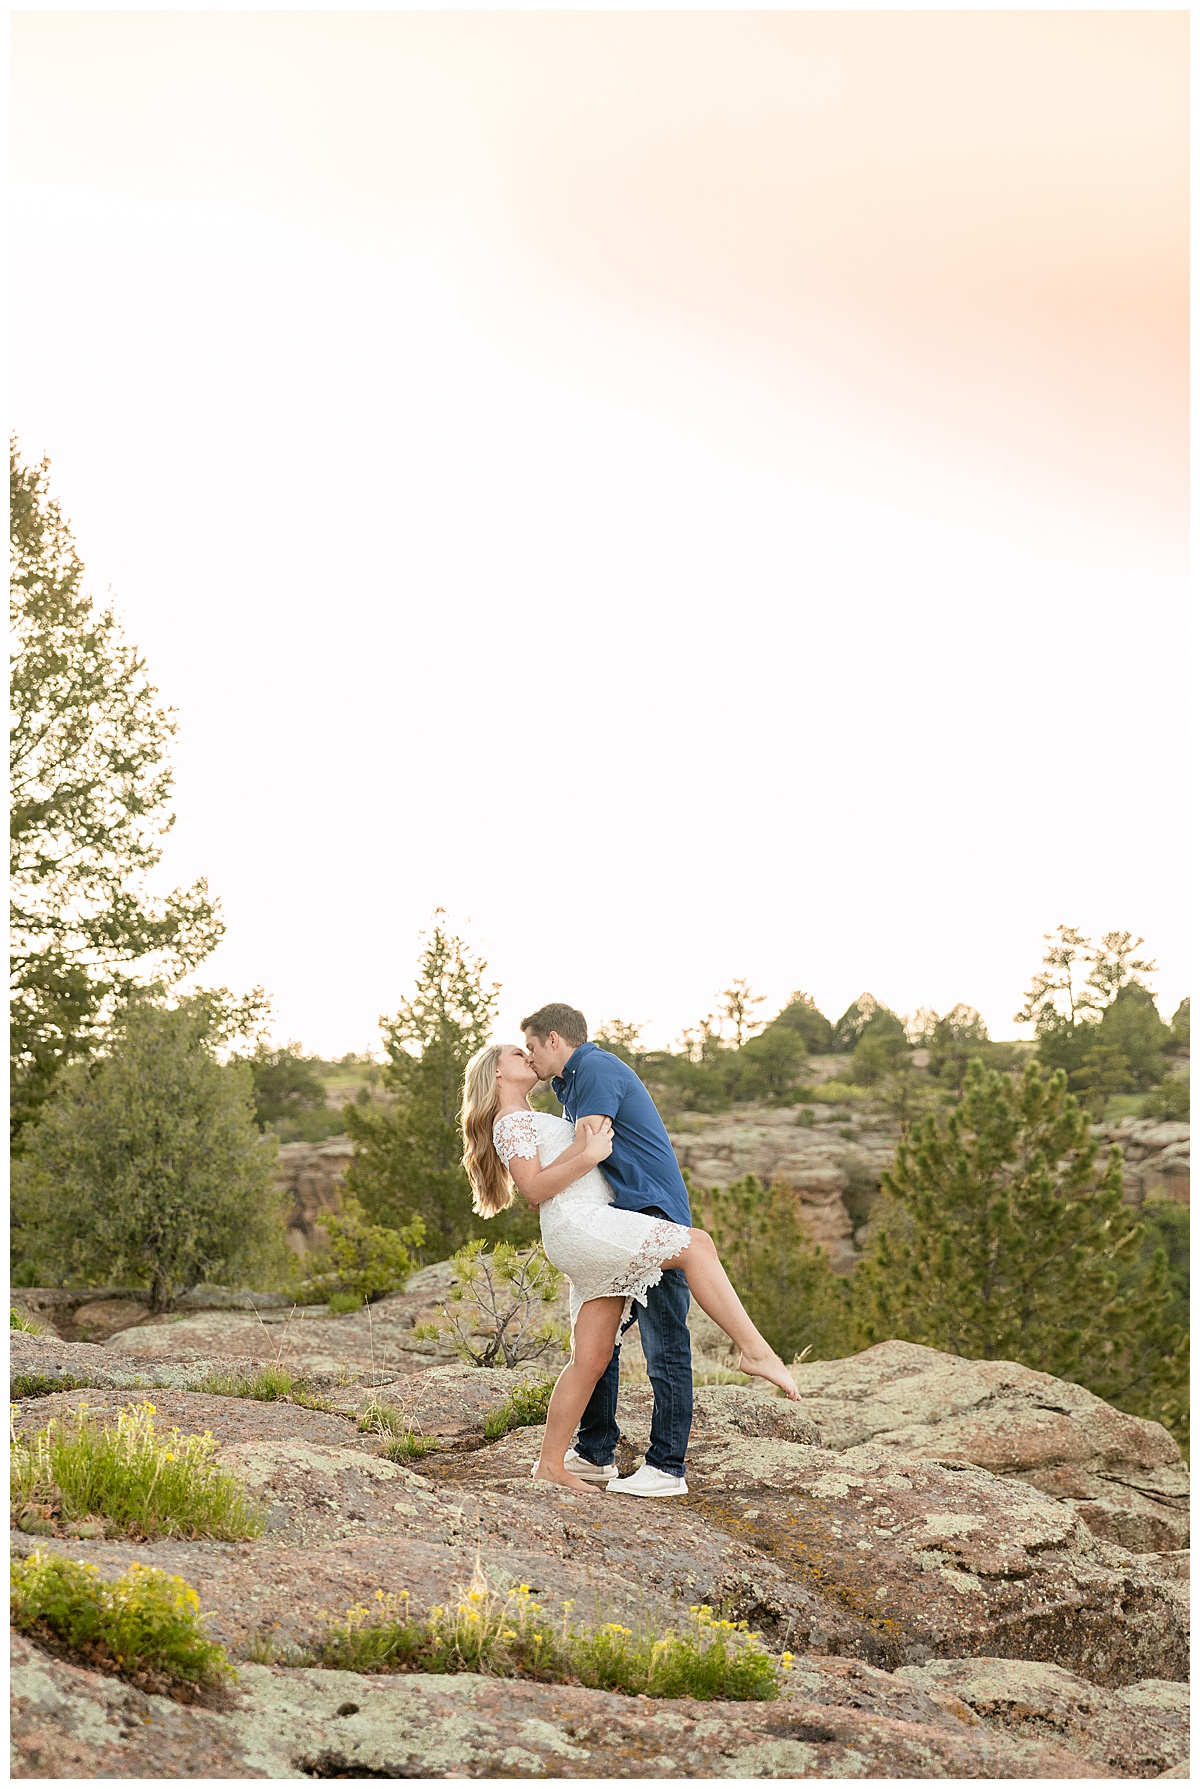 A couple poses for their portraits in front of trees and rocks. The man is wearing a blue button up shirt. The woman is blond and wearing a white lace dress.